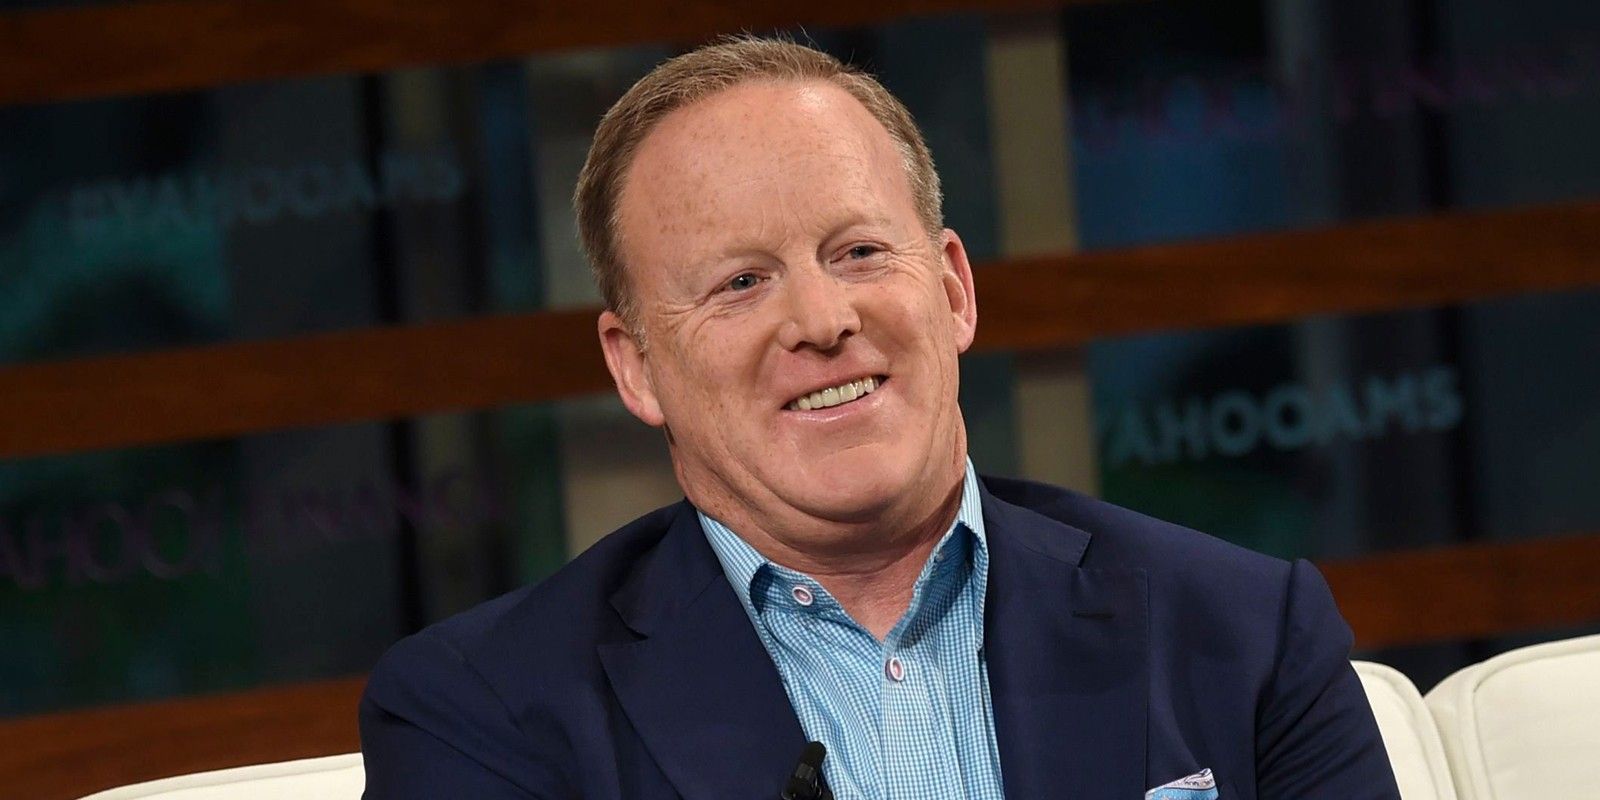 Sean Spicer Responds to Dancing with the Stars Criticism